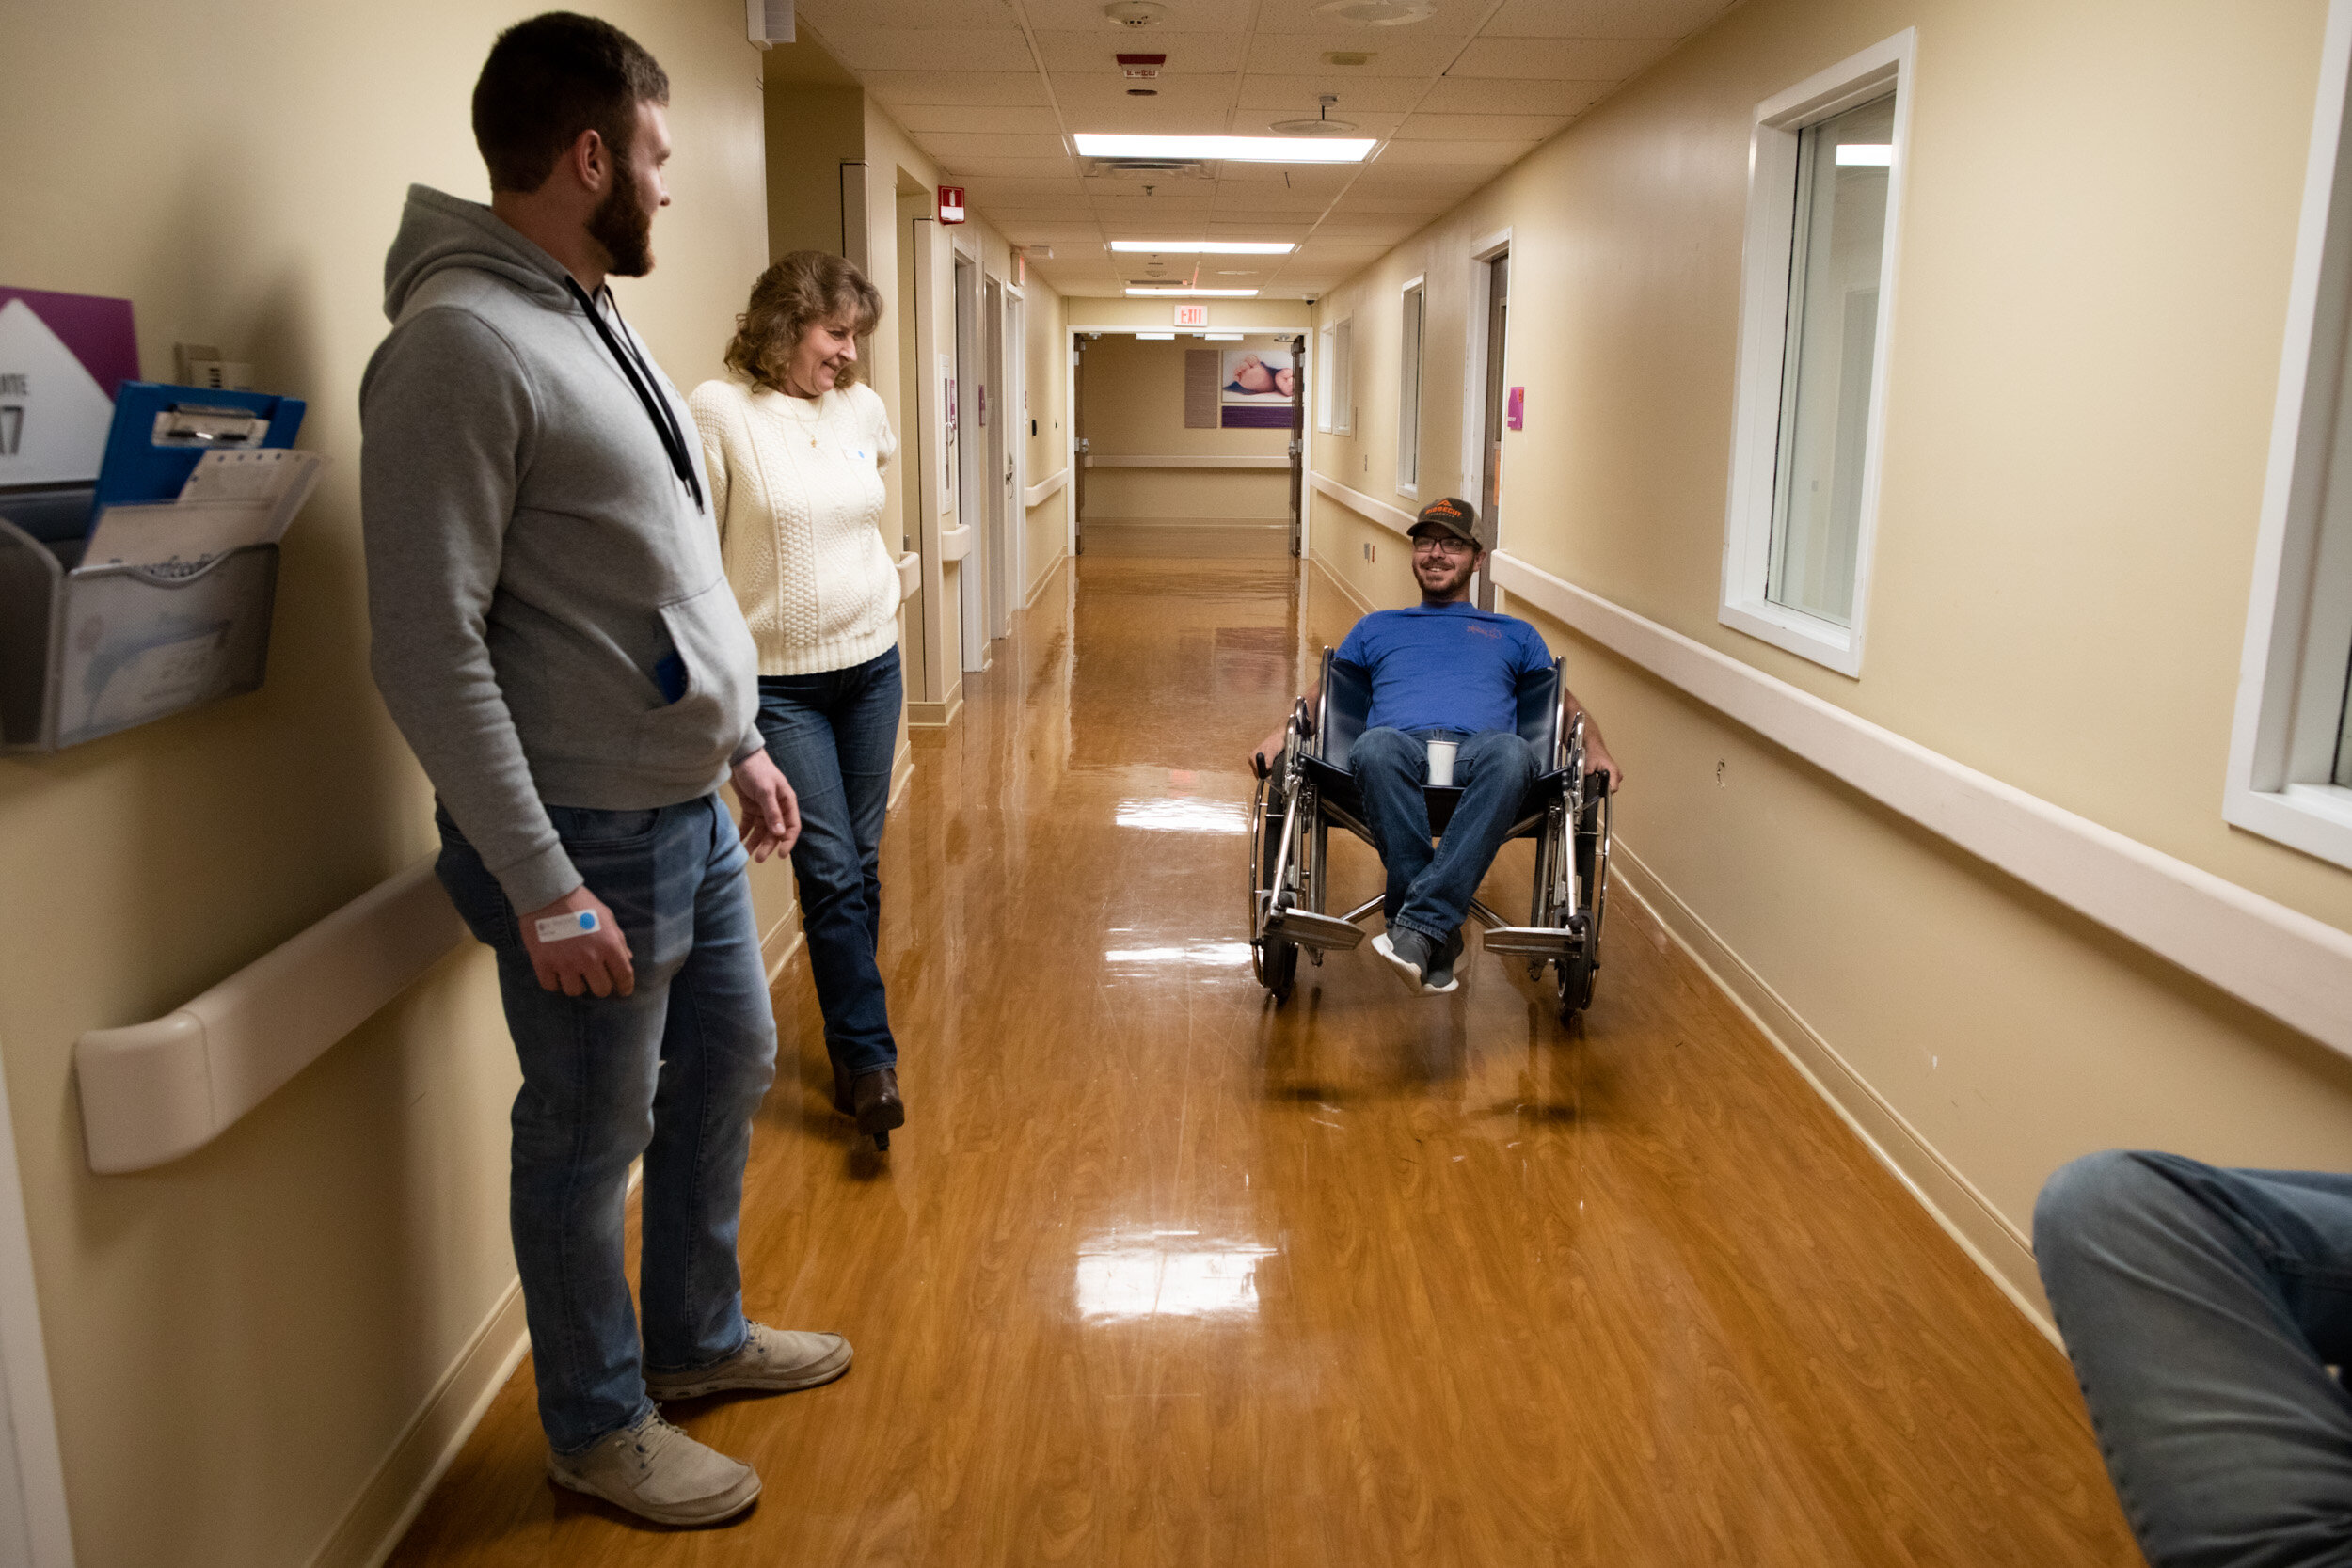 soon-to-be dad playing in wheelchair in hospital hallway